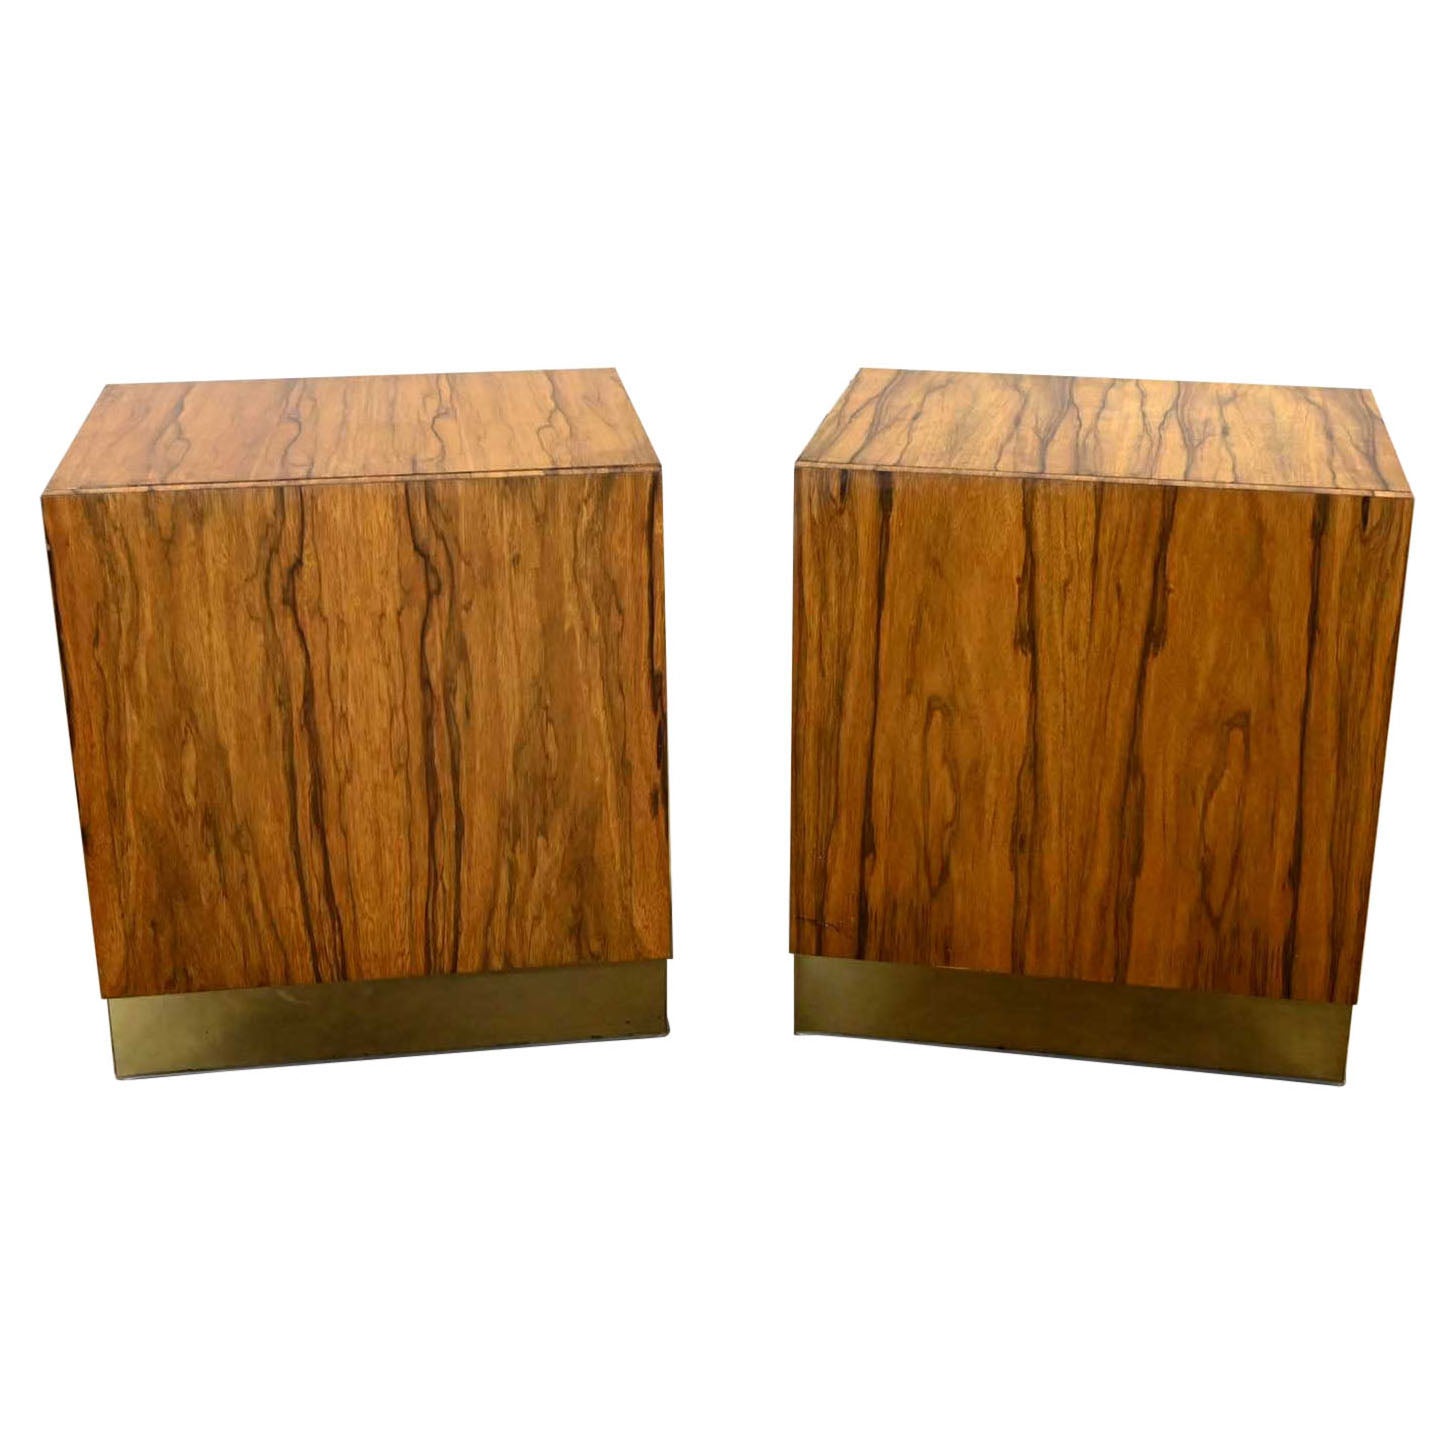 Vintage Modern Rosewood Pair Cube Nightstands by Milo Baughman for Thayer Coggin